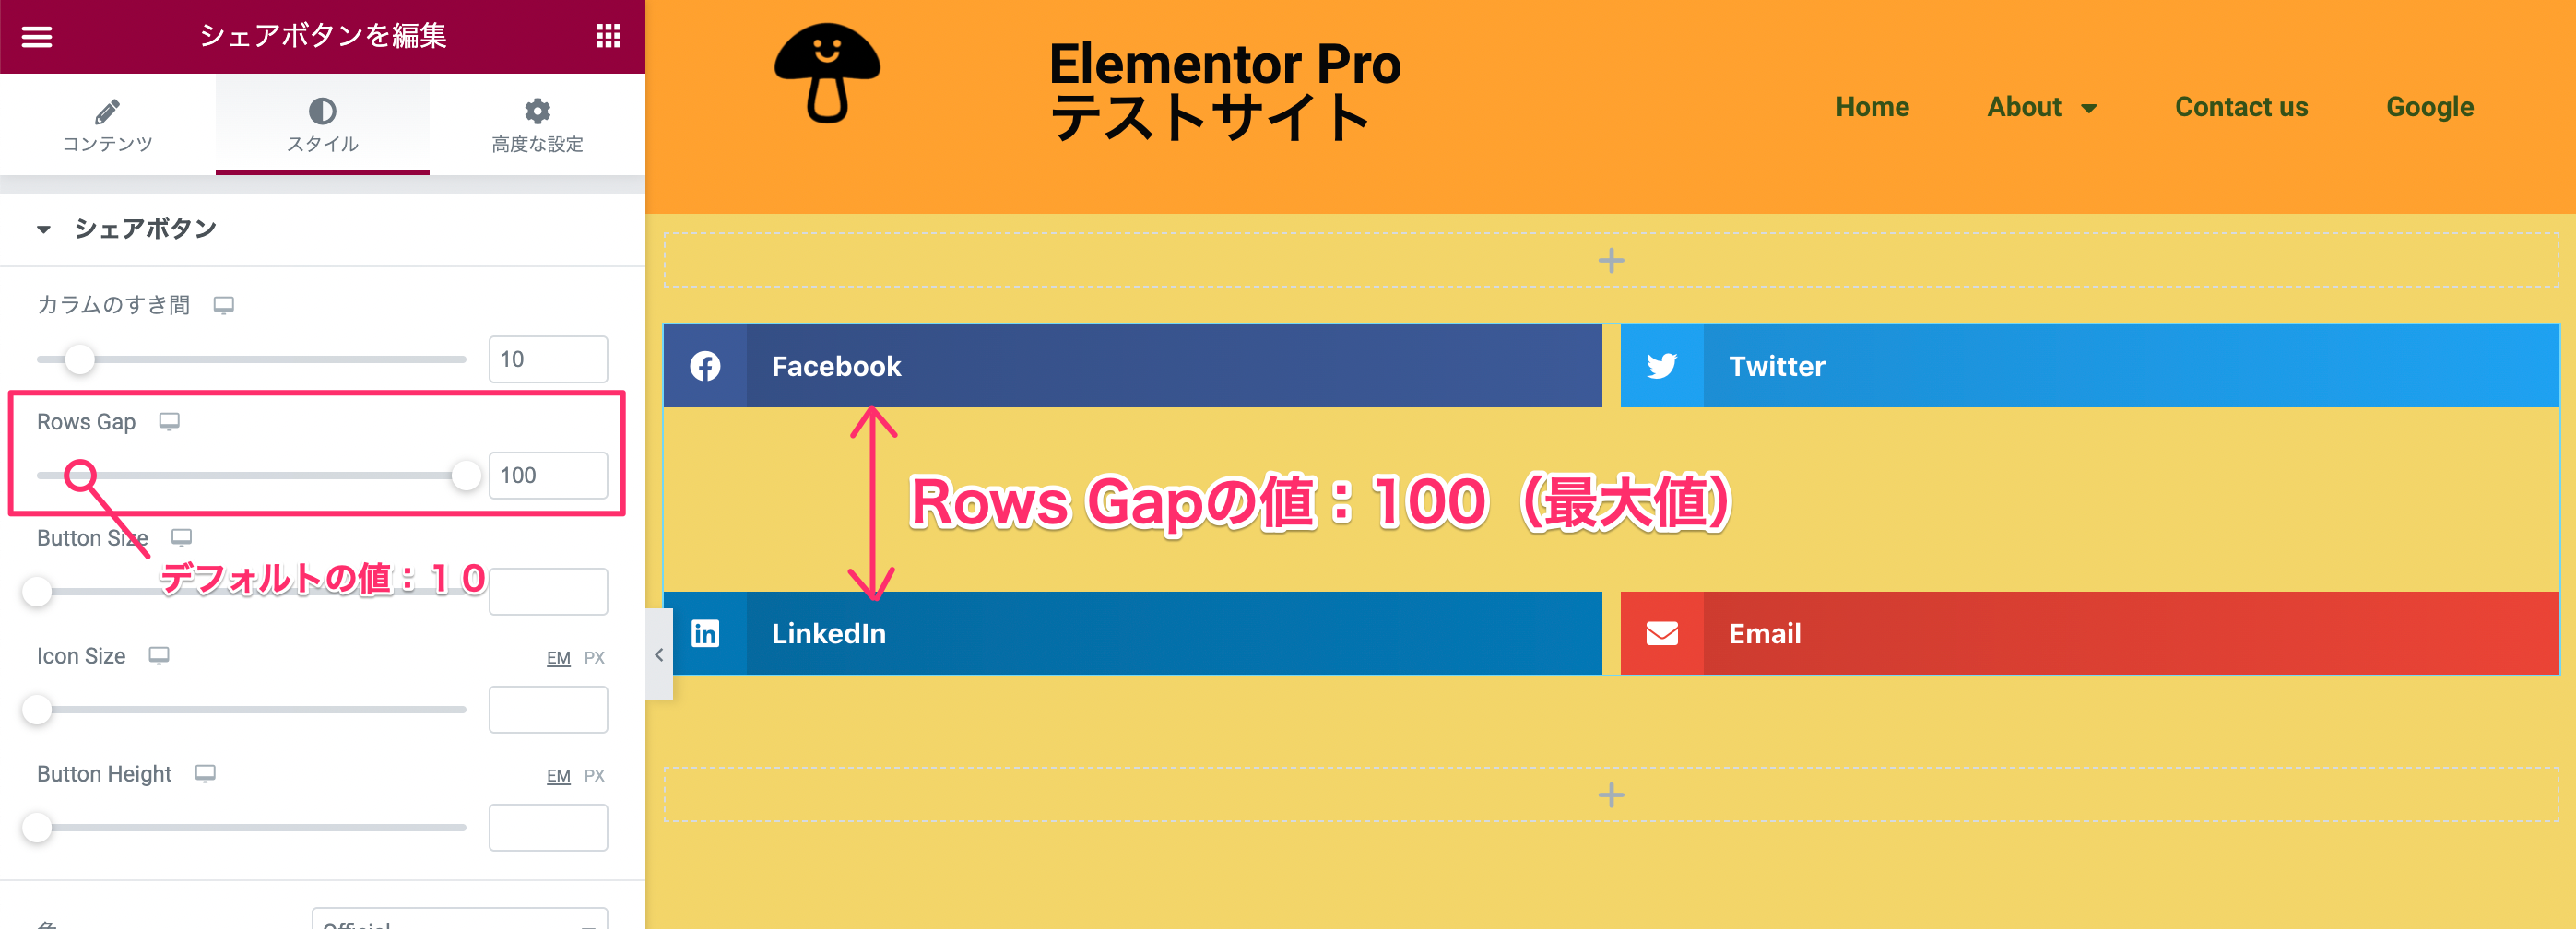 Rows Gapの説明・値を100（最大値）にしたときの表示画面